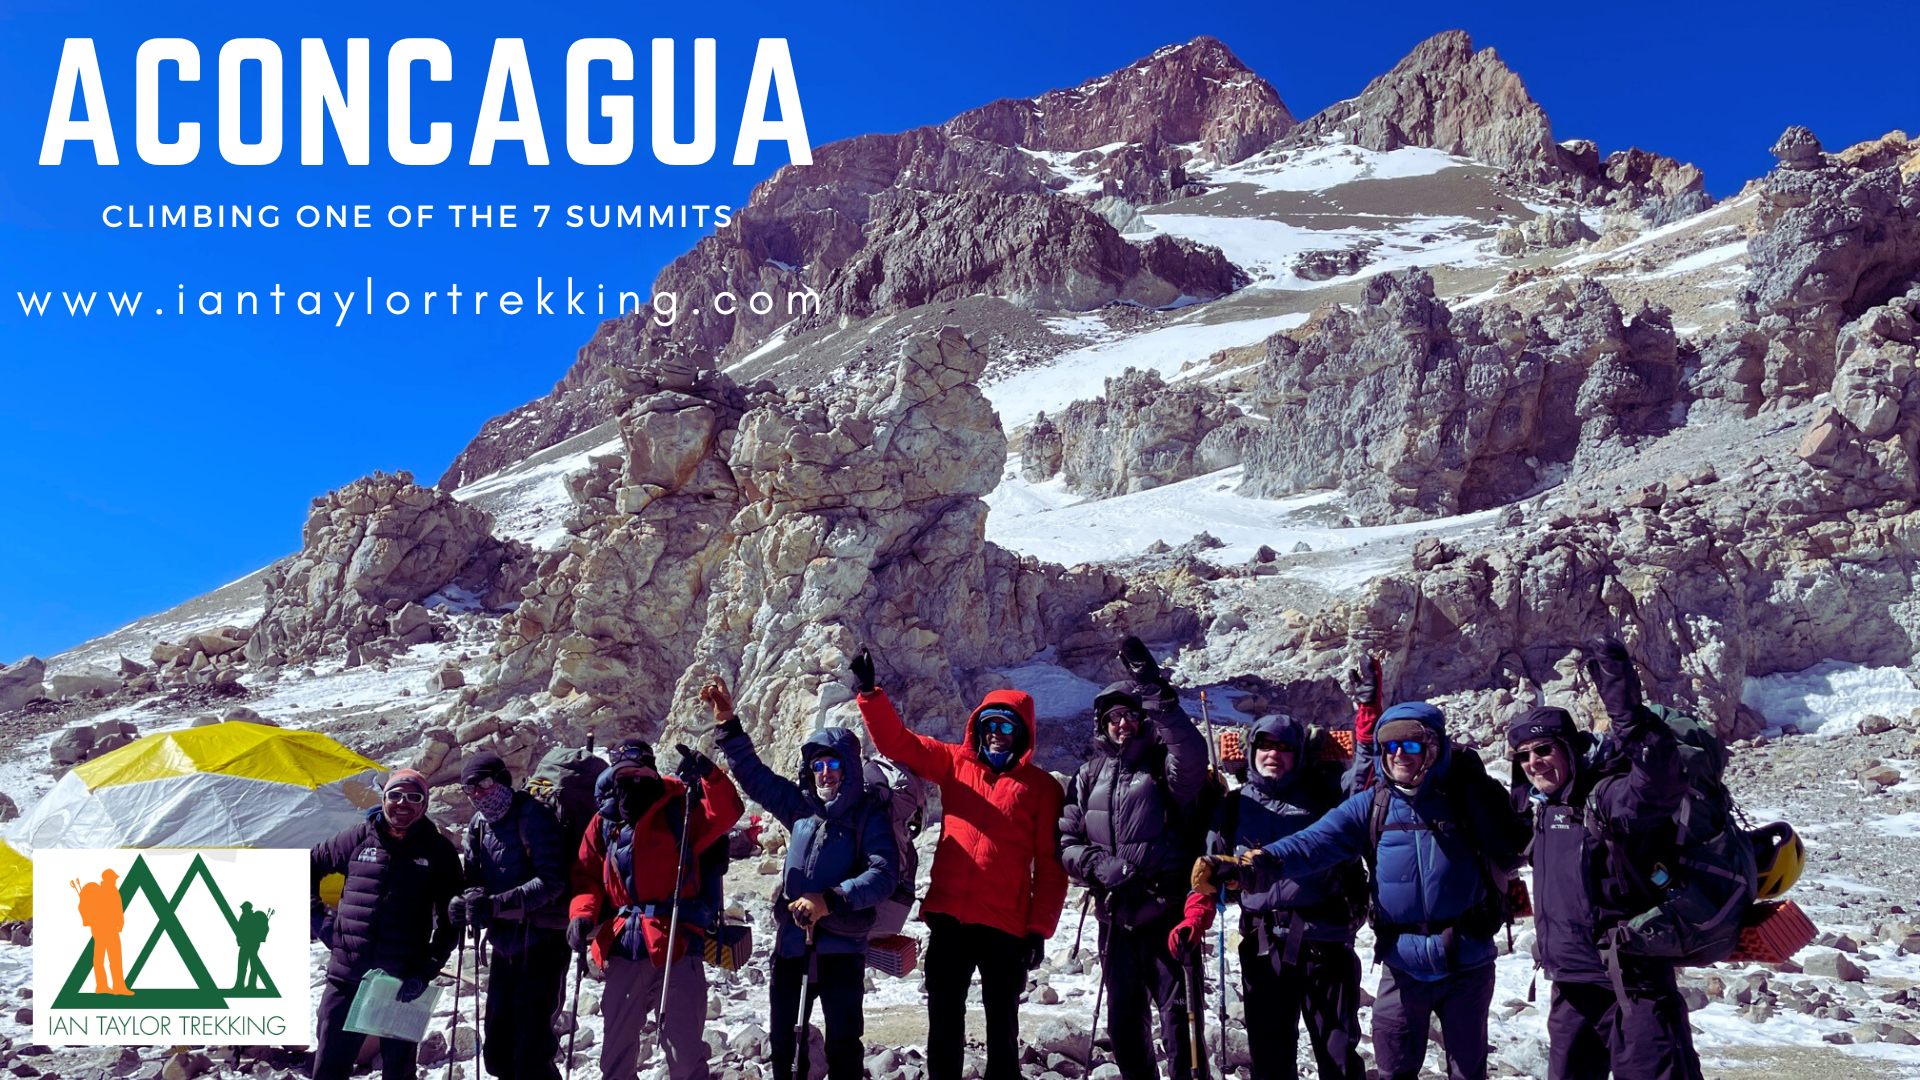 Four important thing to know about Aconcagua